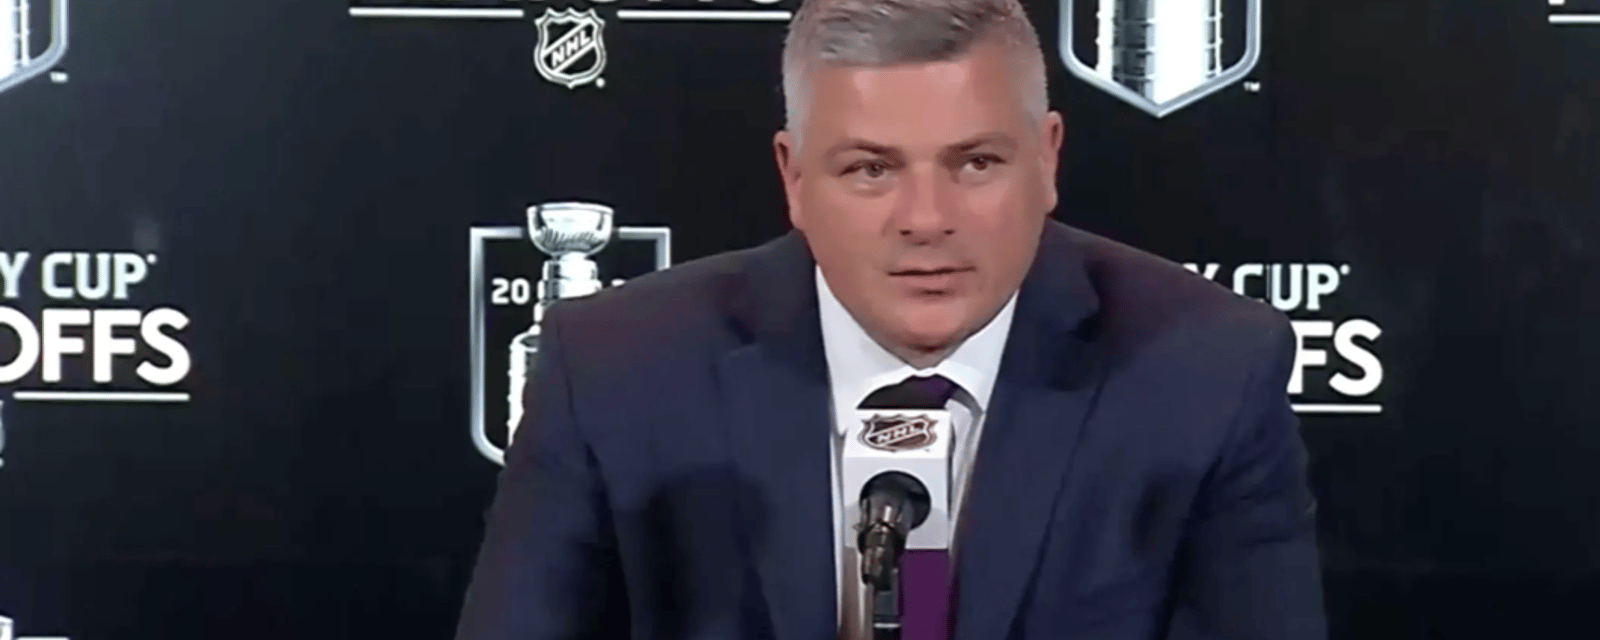 Sheldon Keefe reacts to Leafs once again failing in closeout game 